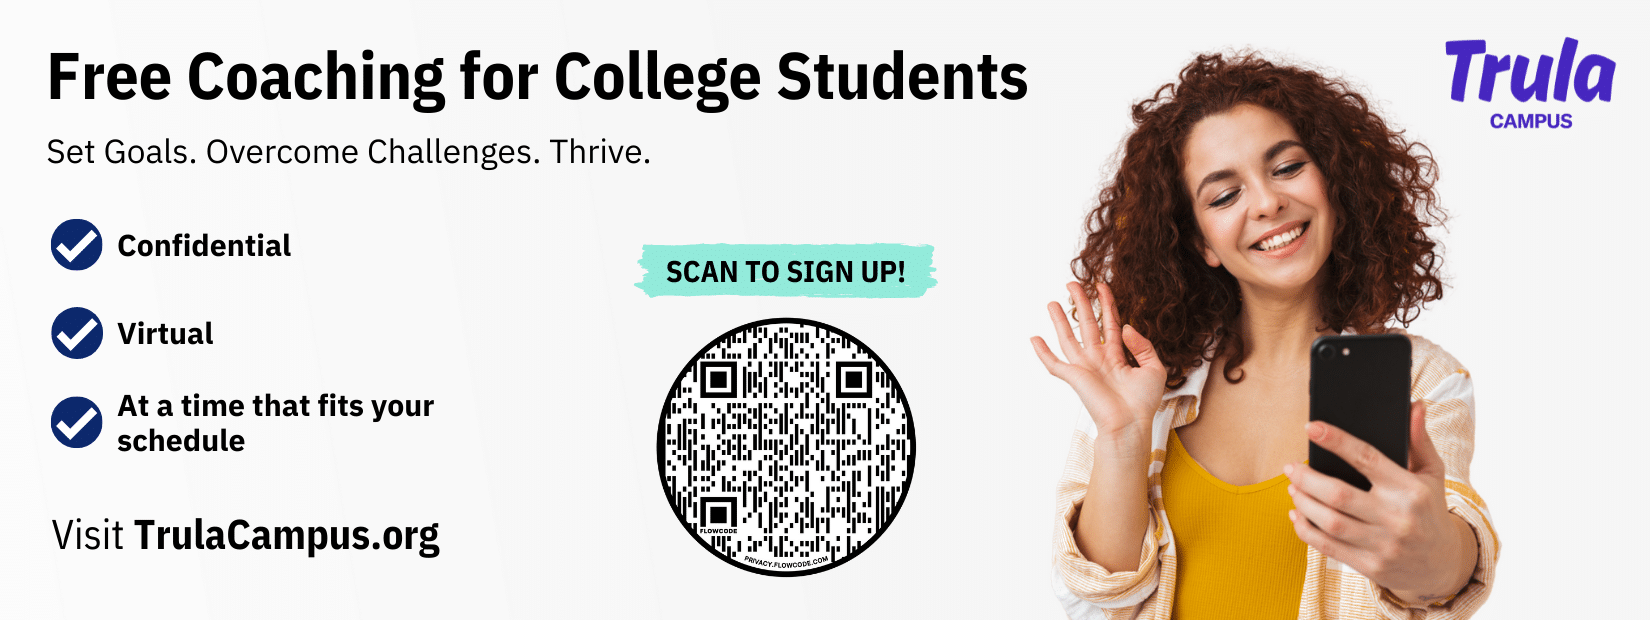 Free coaching for college students at Trula campus. Get started today at Trulacampus.org!